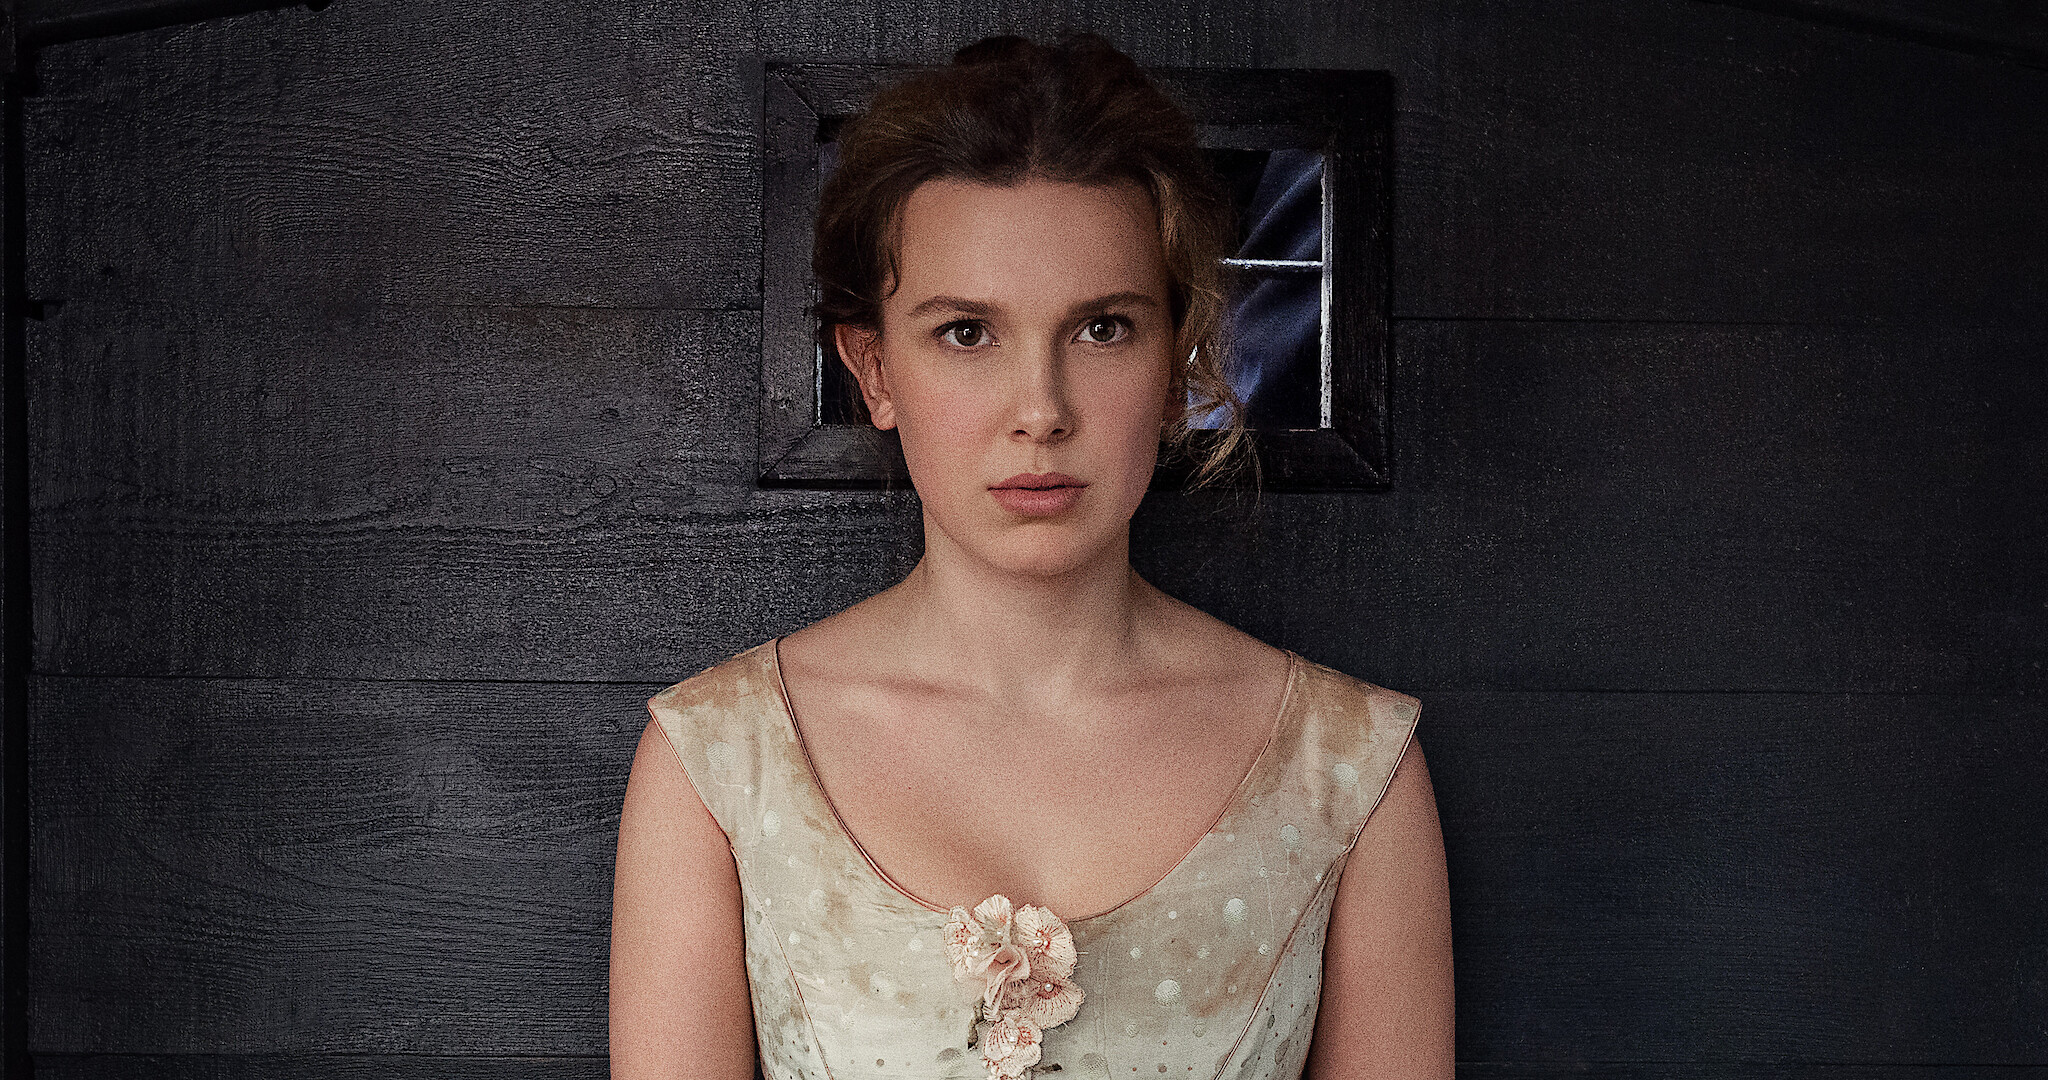 Millie Bobby Brown Enola Holmes 2 Release Date Photos image